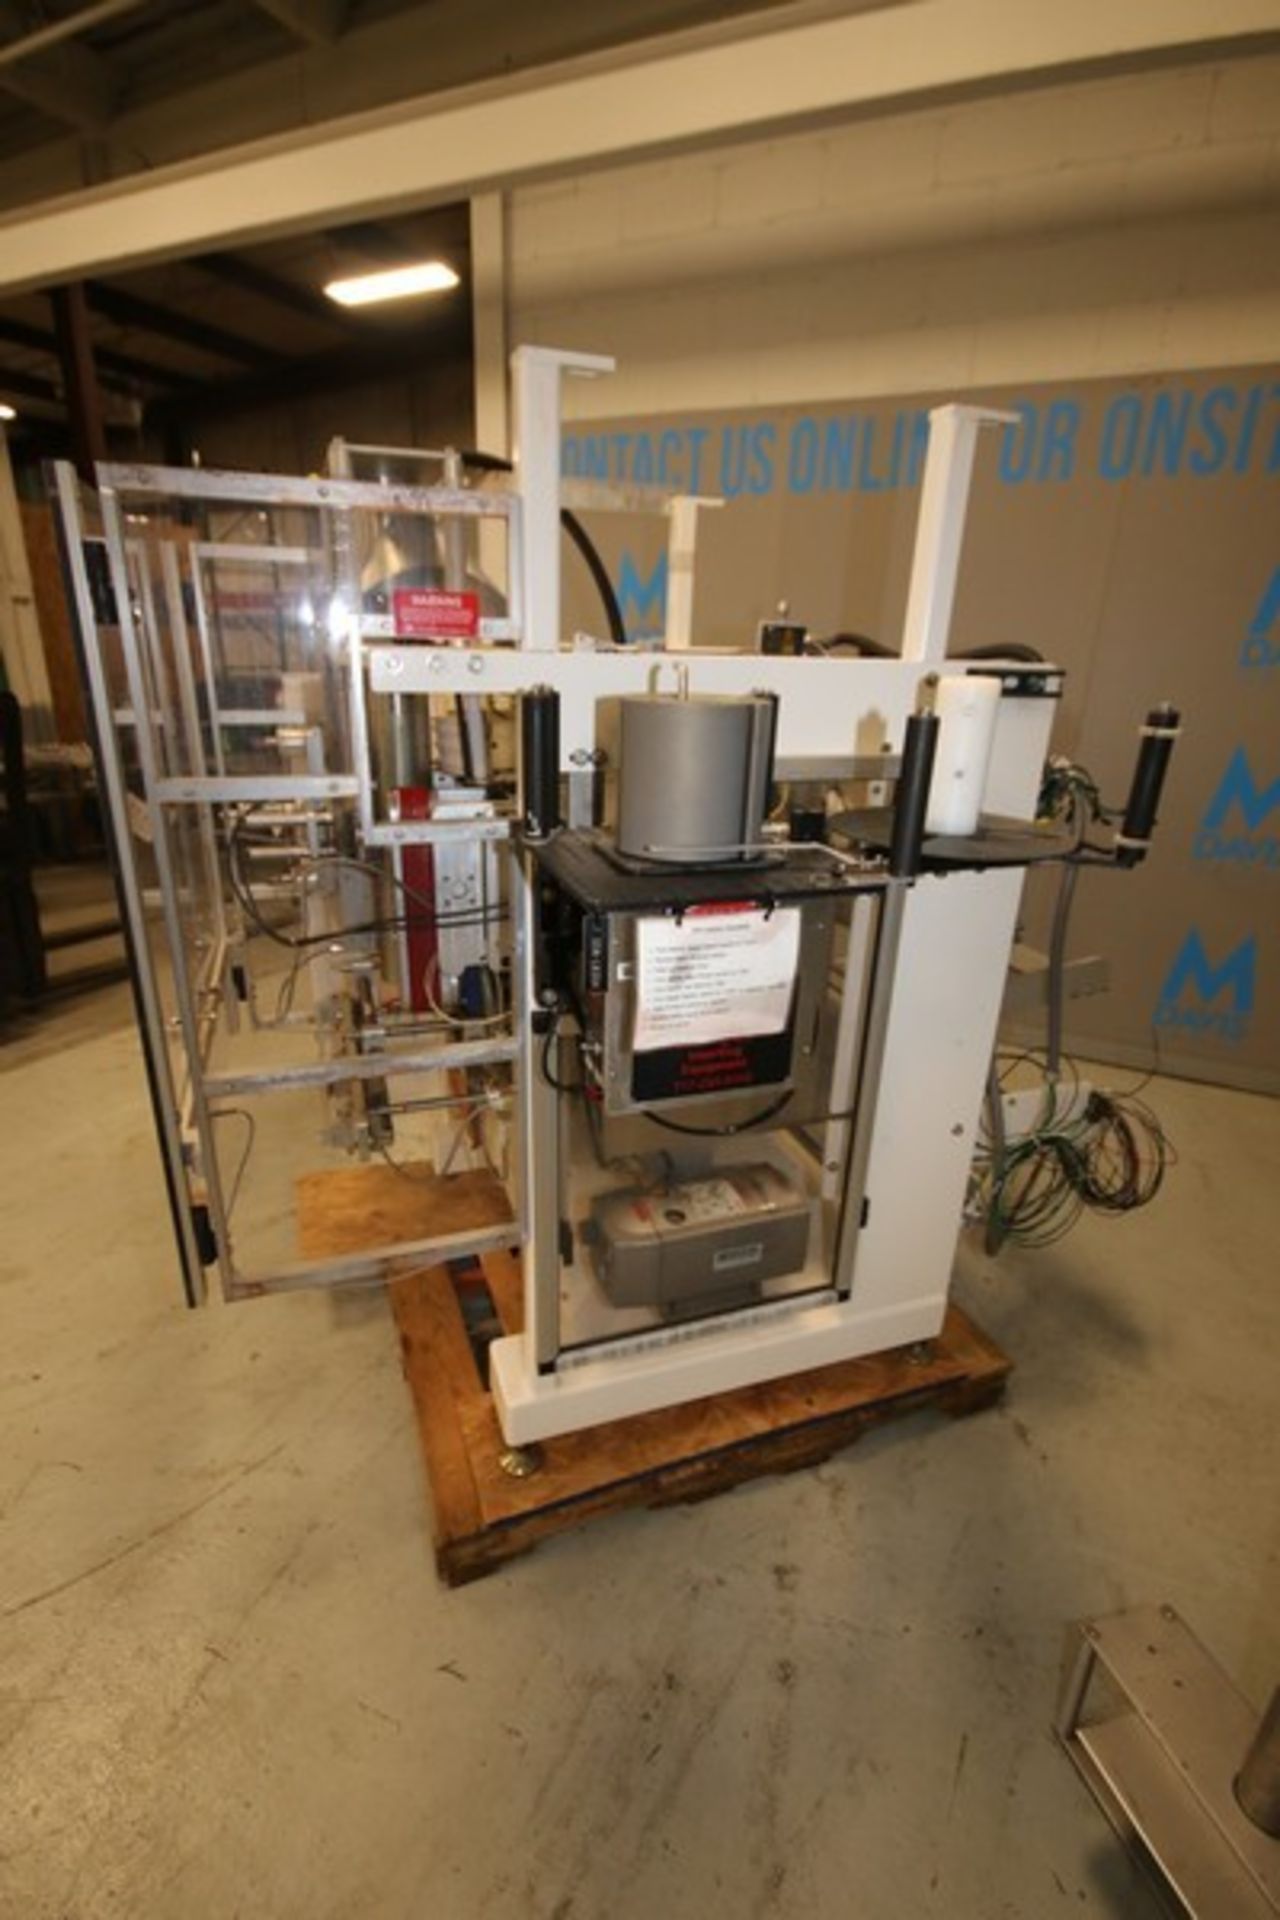 Universal Packaging Vertical Form Fill & Seal Packaging Machine (VFFS), Model S2000C, SN 1711, - Image 9 of 12